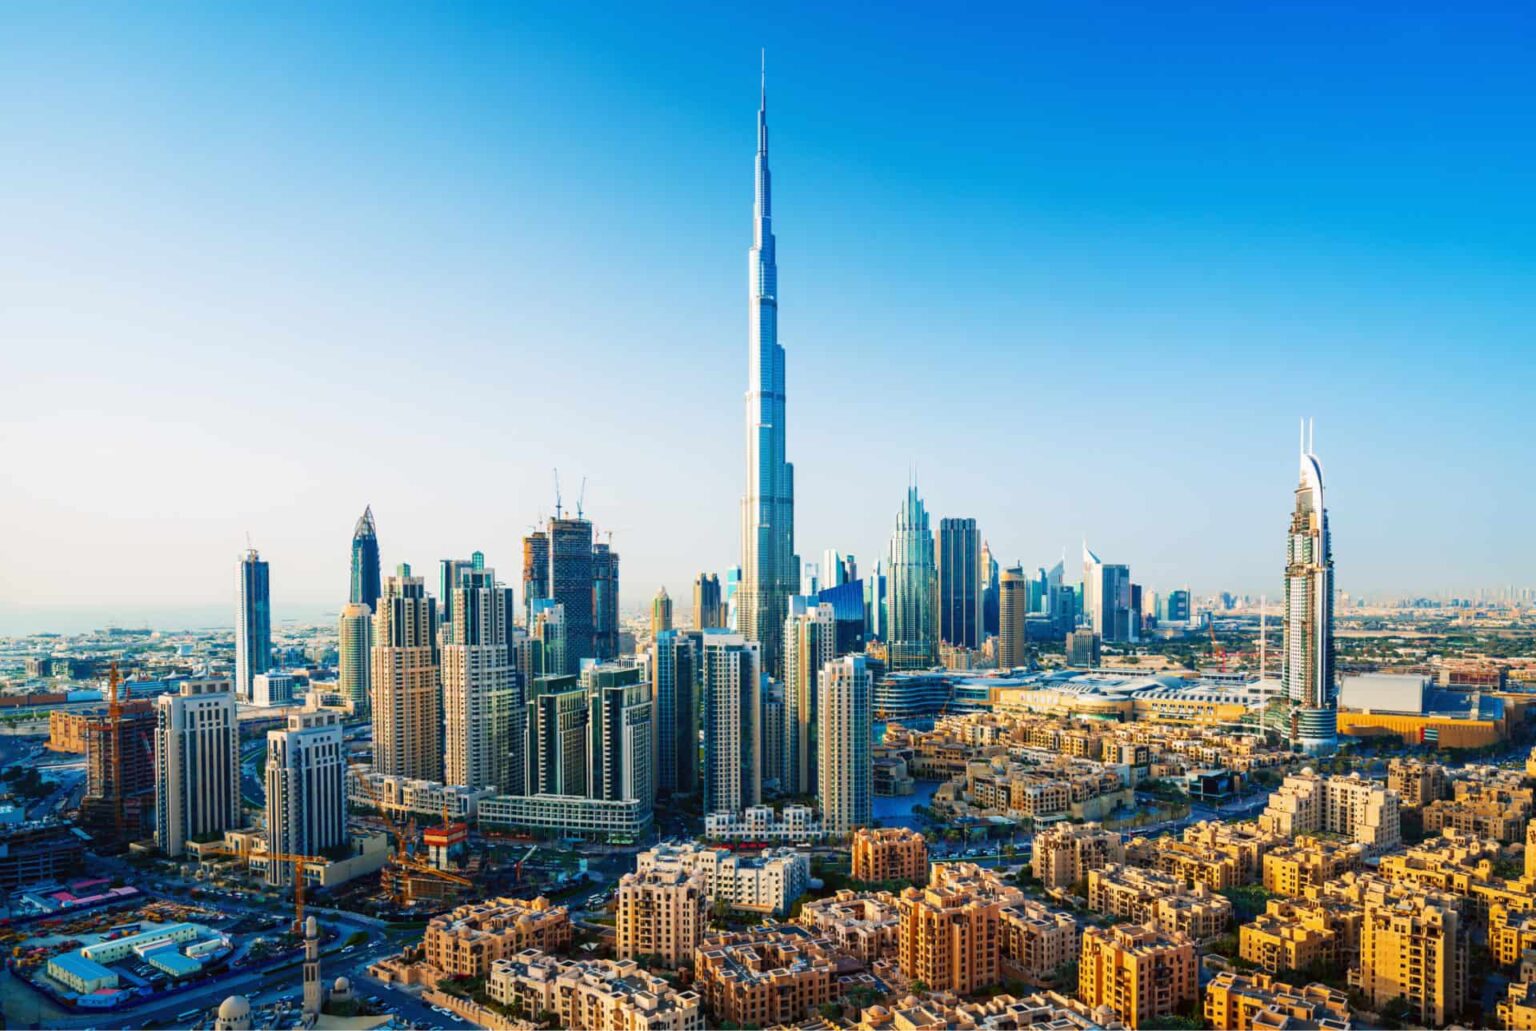 UAE looks to easing new reforms to boost economy and global image